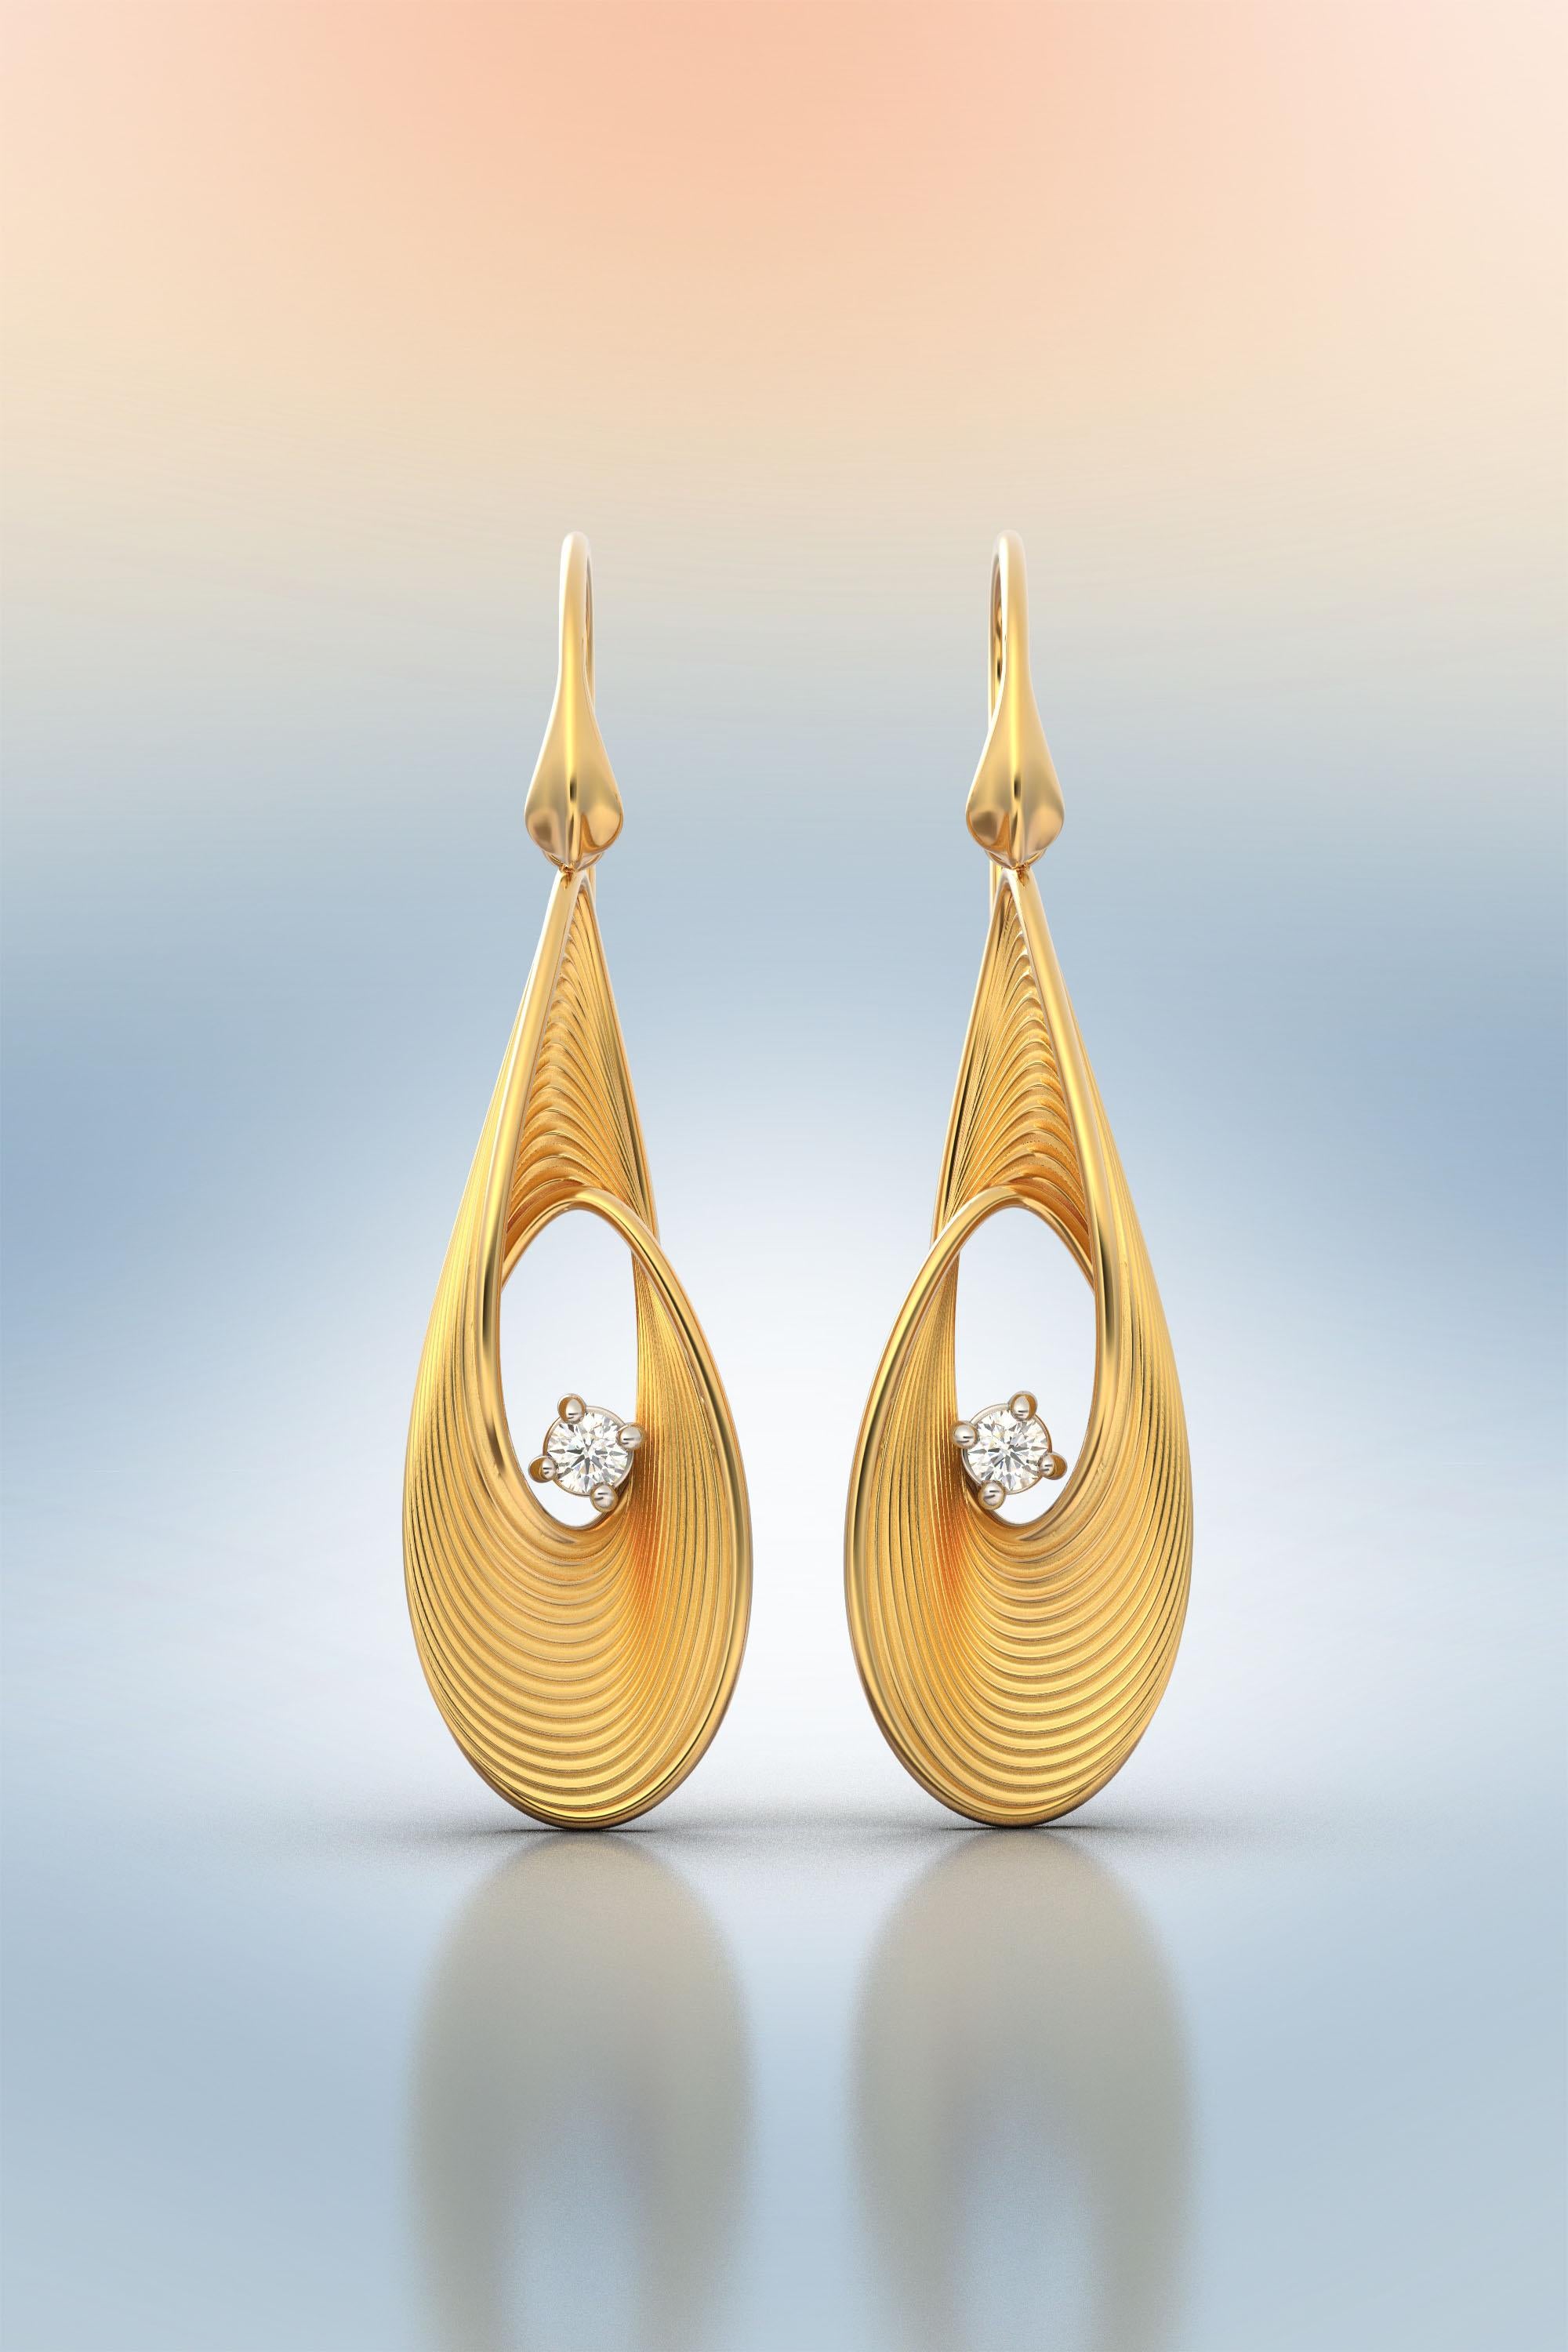 14k Gold Earrings with Diamonds, Oltremare Gioielli Gold Earrings Made in Italy In New Condition For Sale In Camisano Vicentino, VI